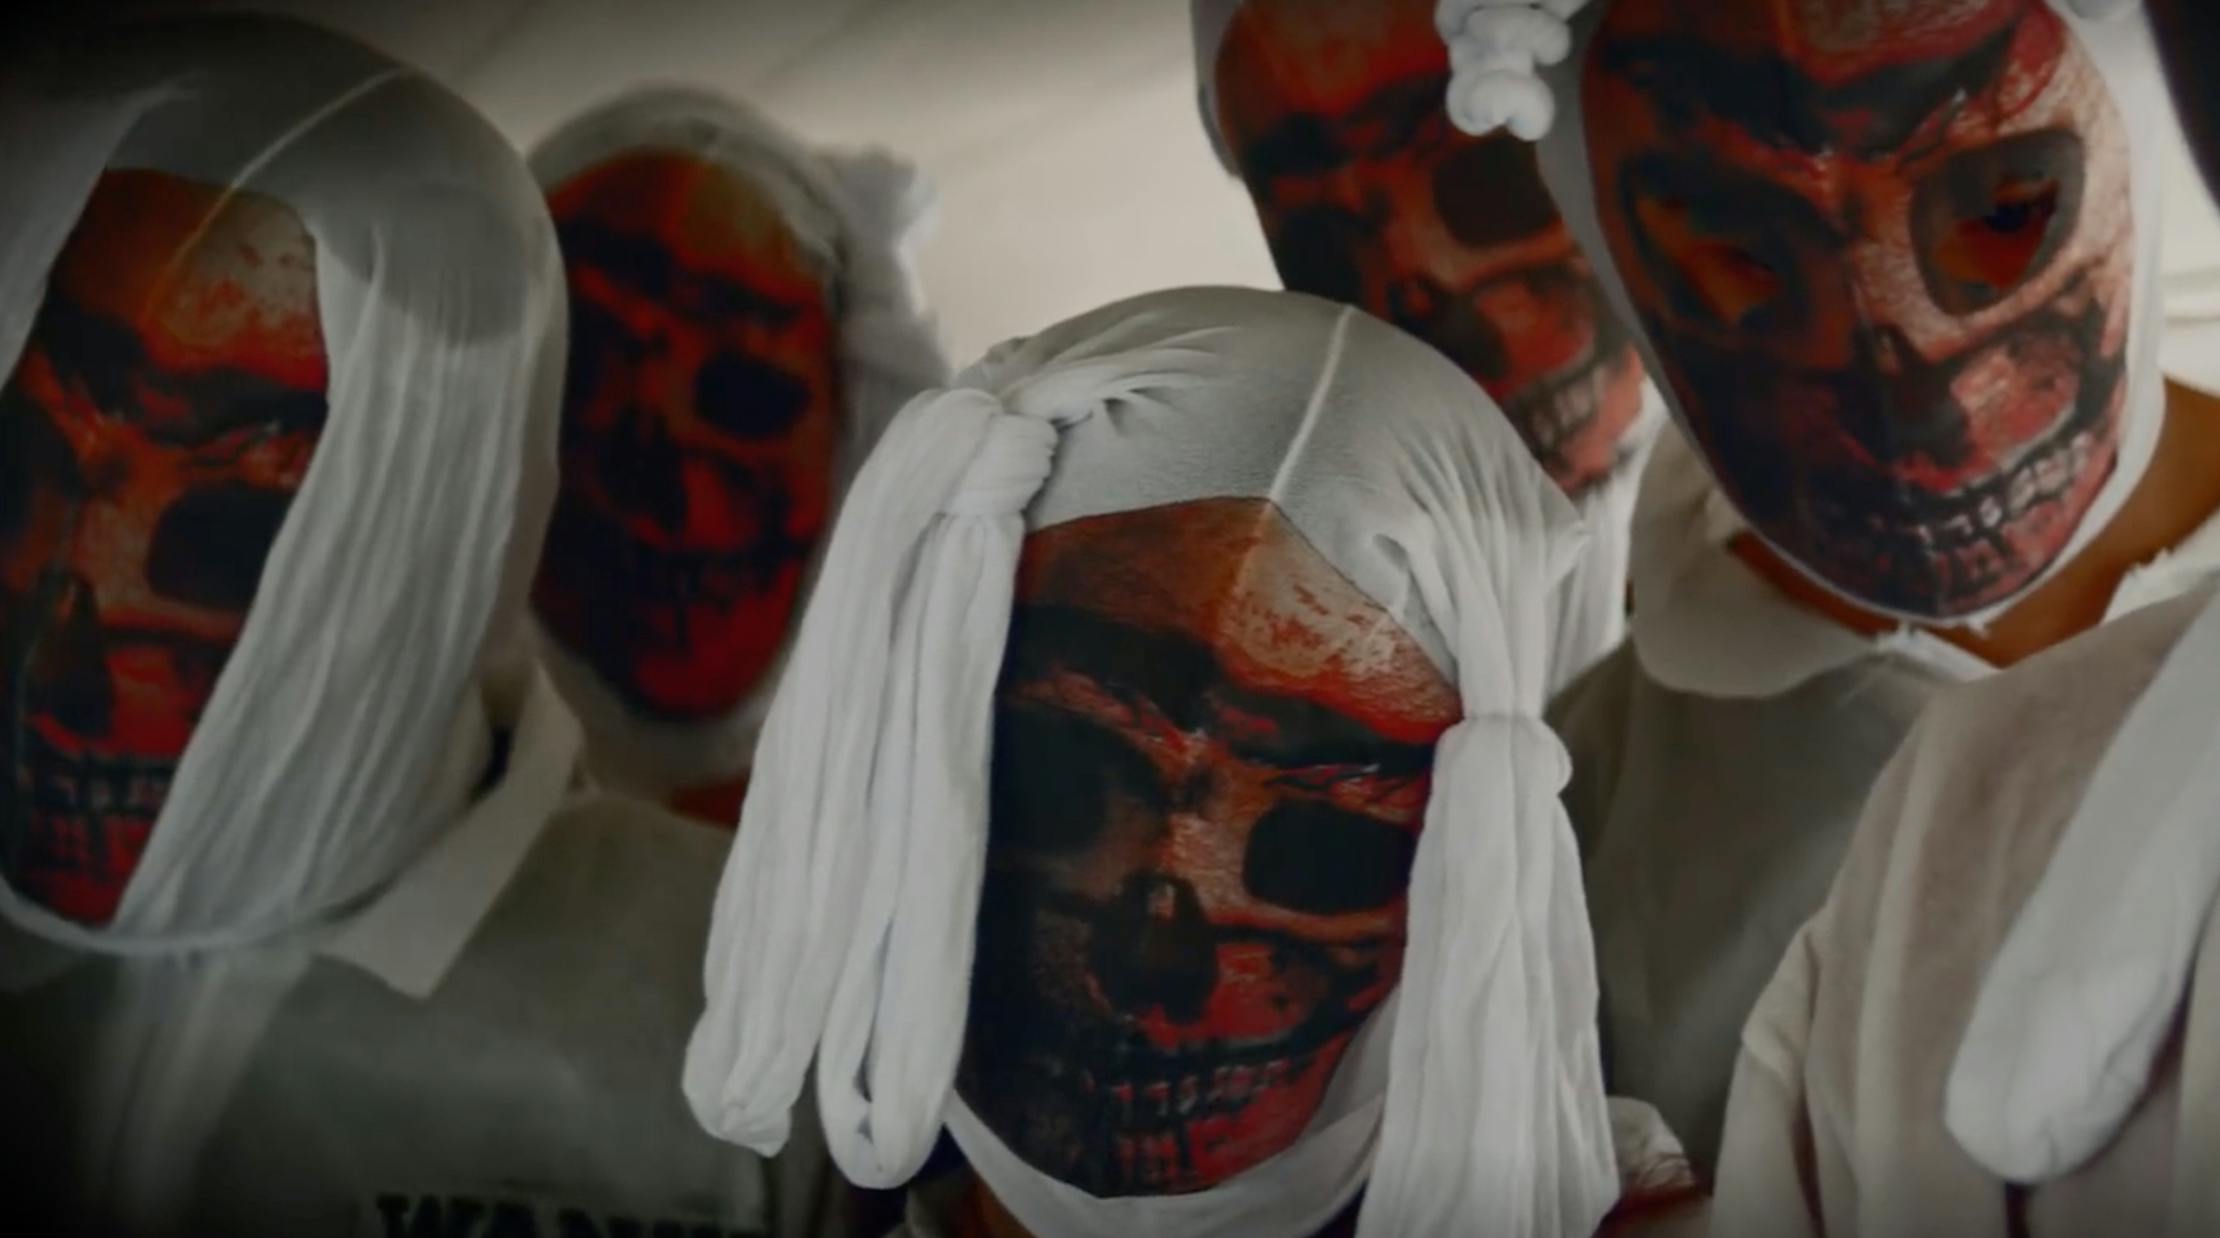 Go Behind The Scenes Of Slipknot's All Out Life Video